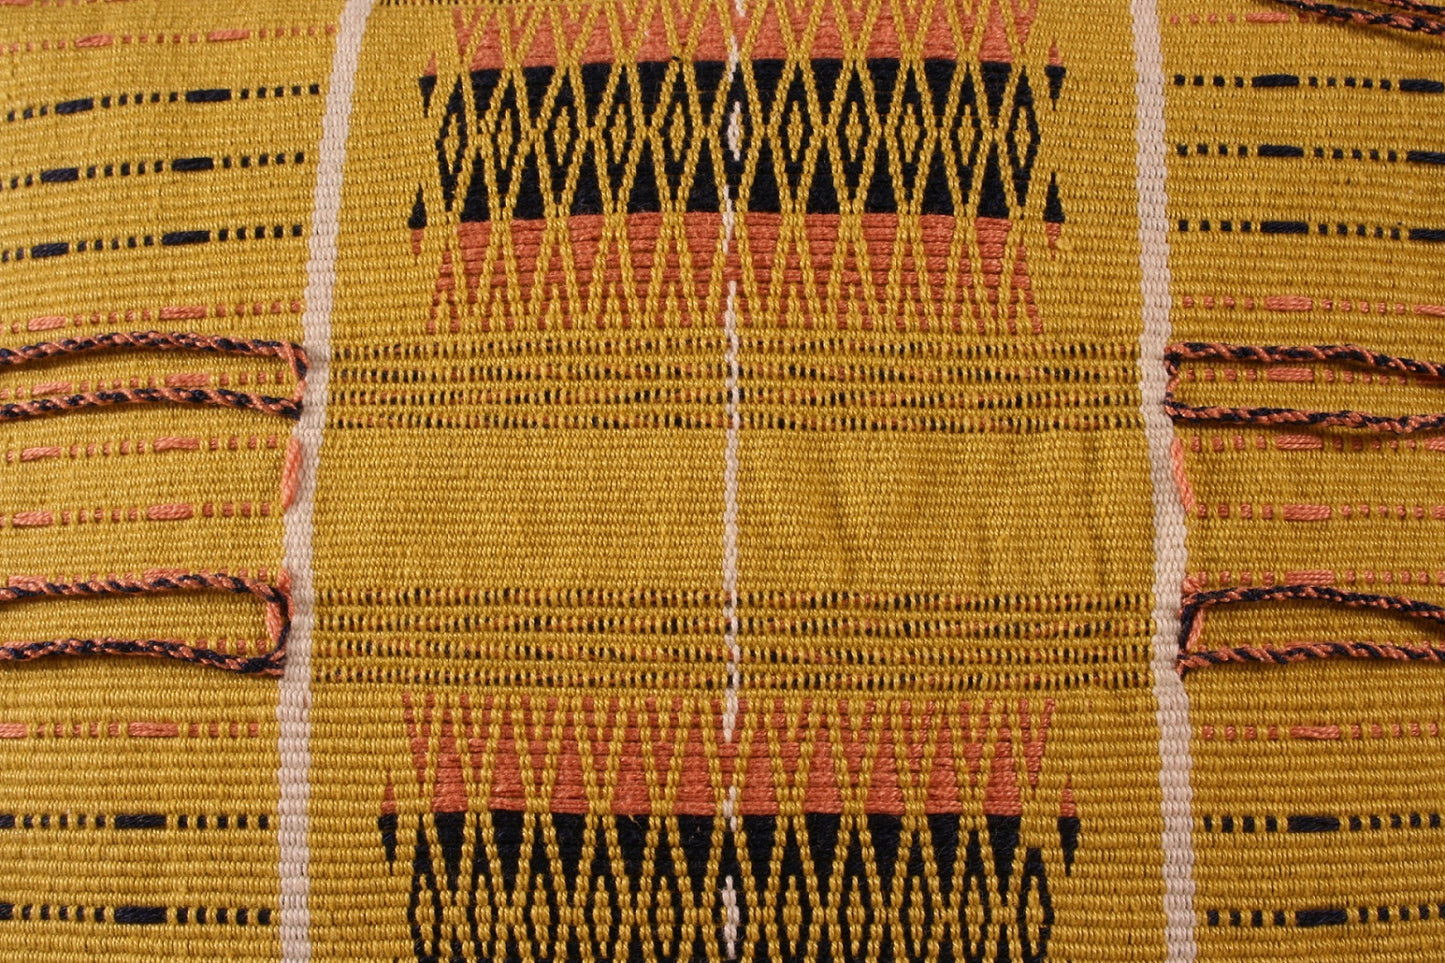 Acid yellow hand woven cushion close-up view